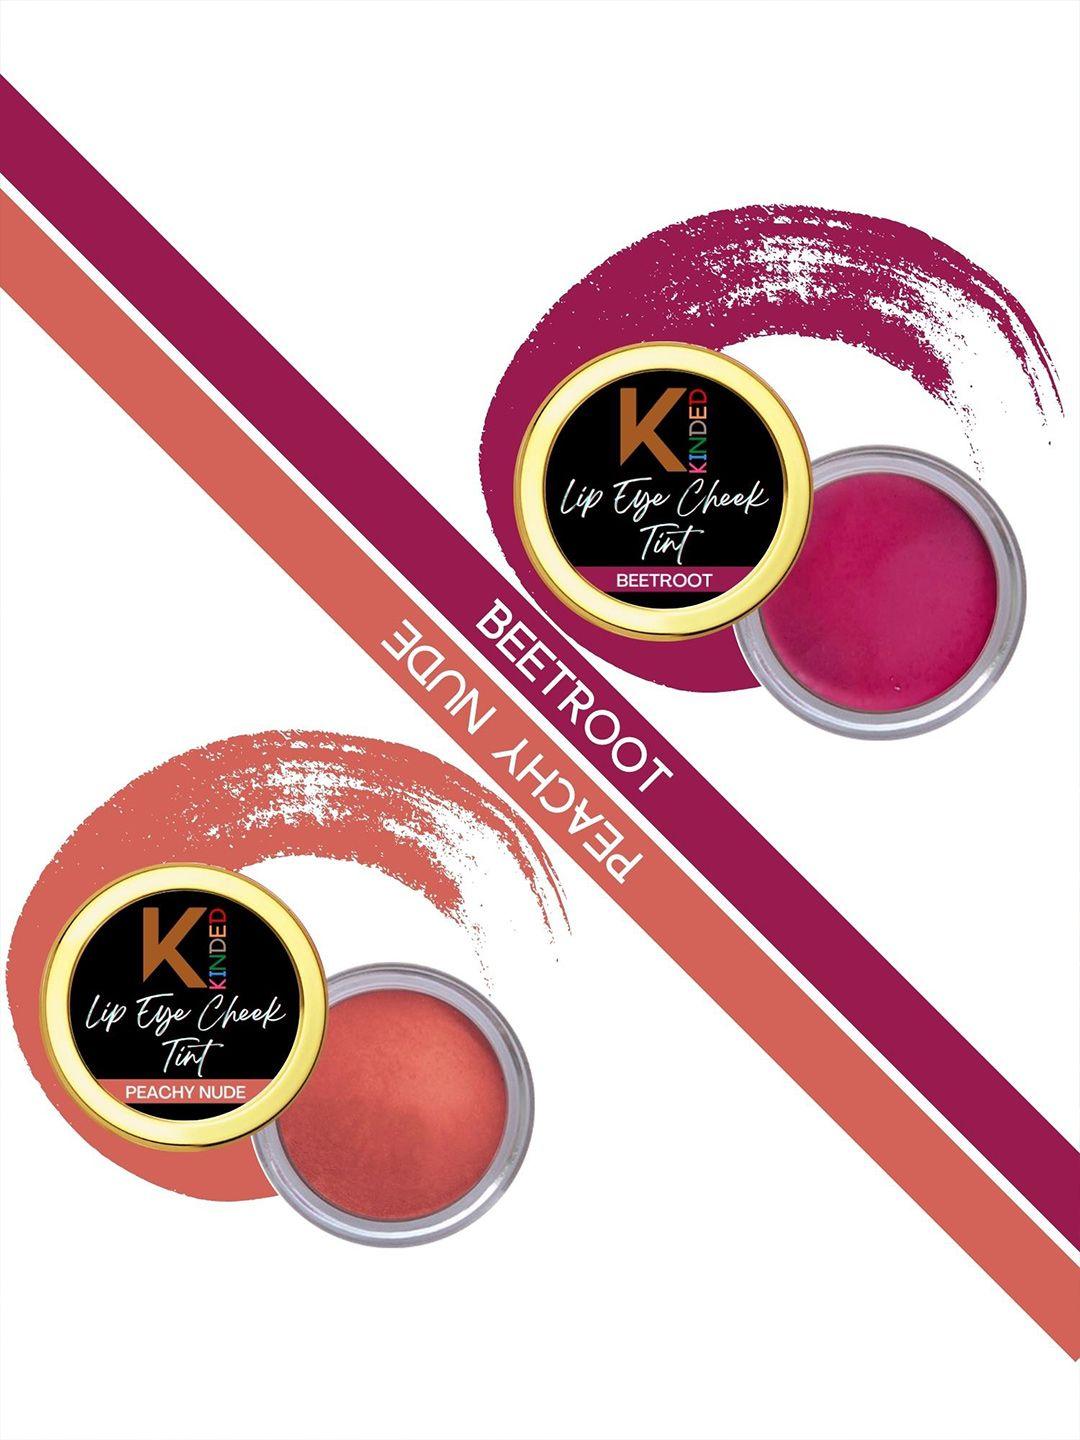 kinded set of 2 creamy matte 3-in-1 lip eye cheek tint 8 g each - shade 01 & 03